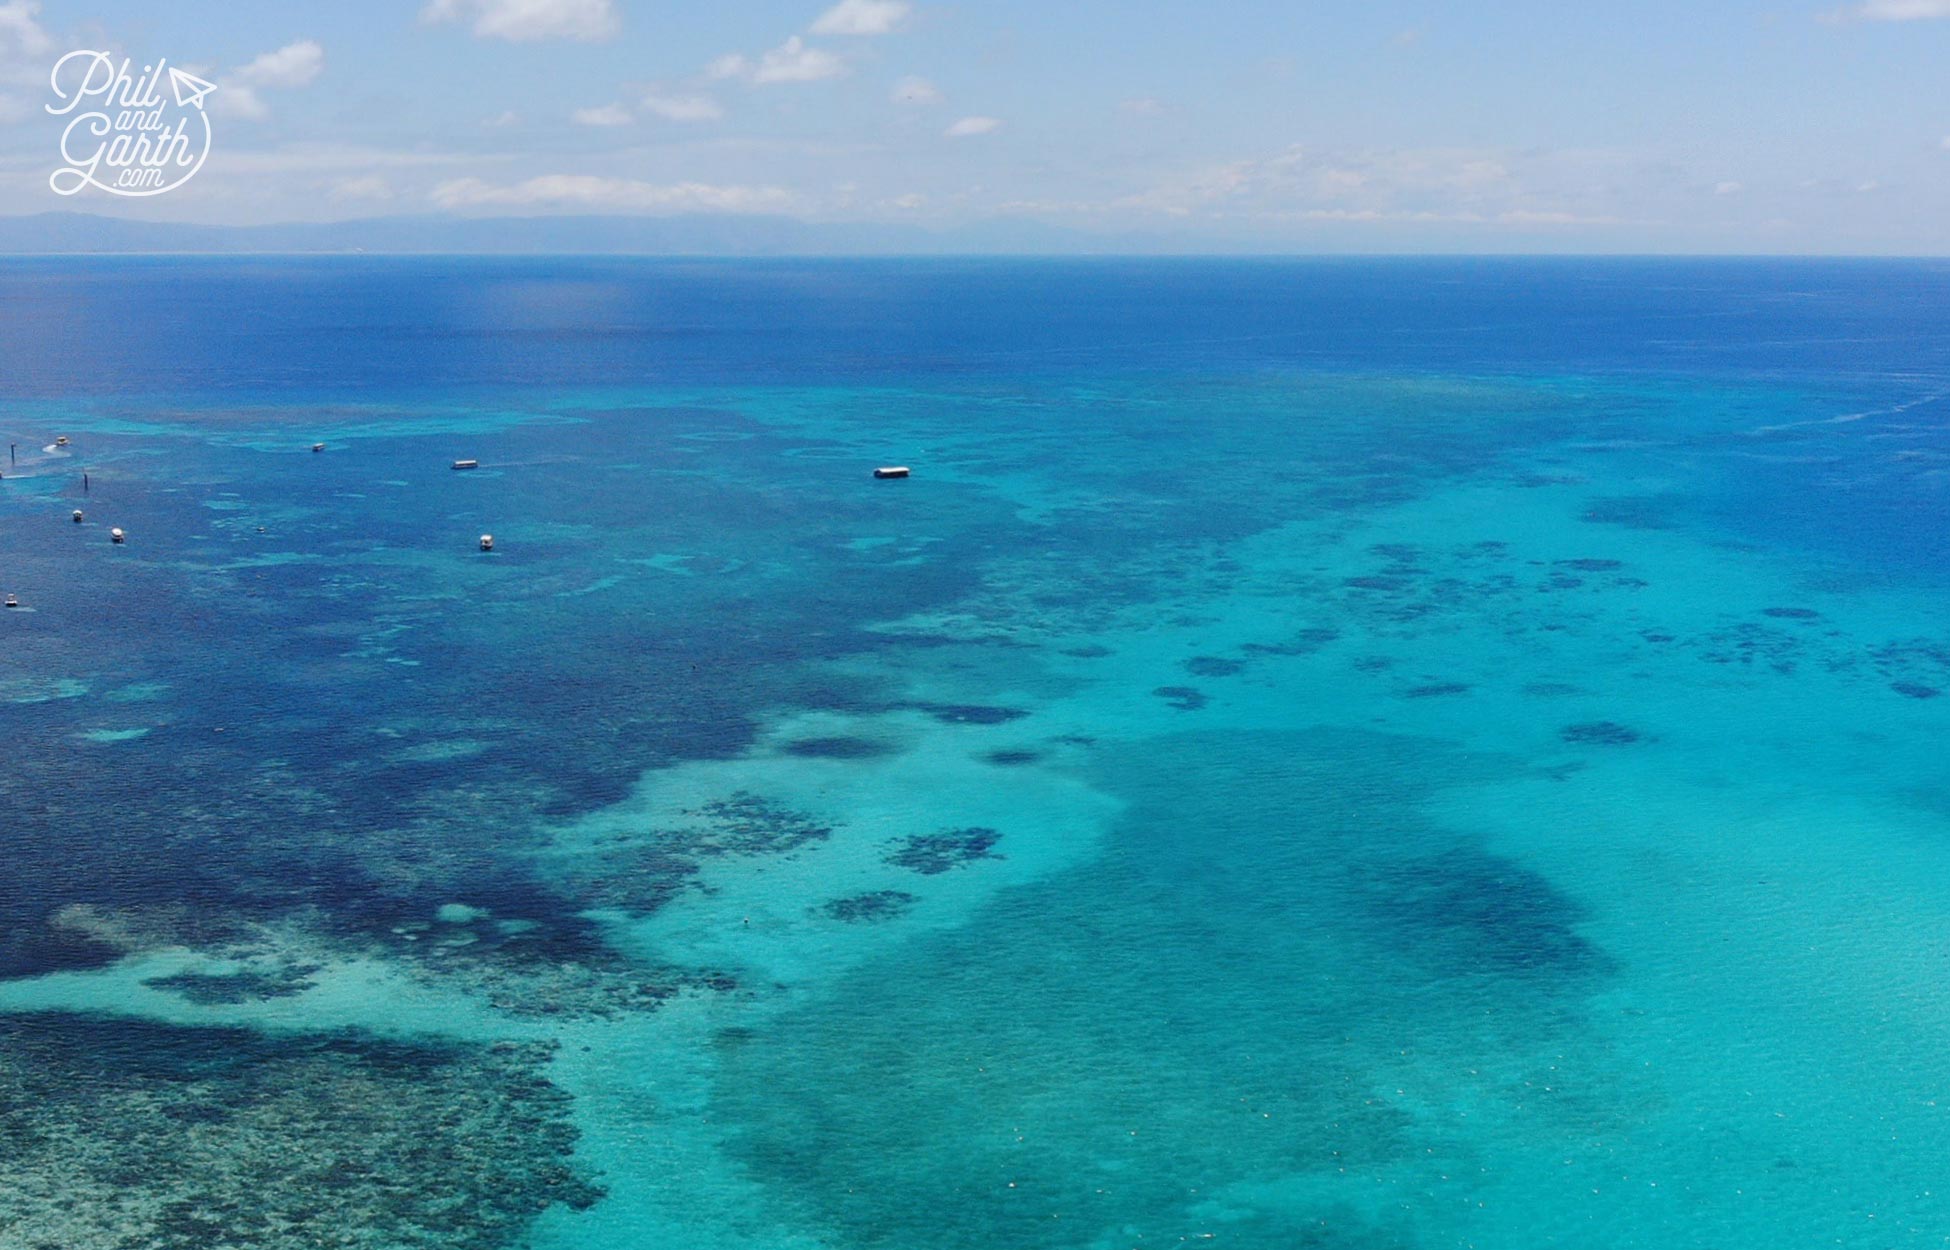 The Great Barrier Reef is a 90 minute ride from Port Douglas